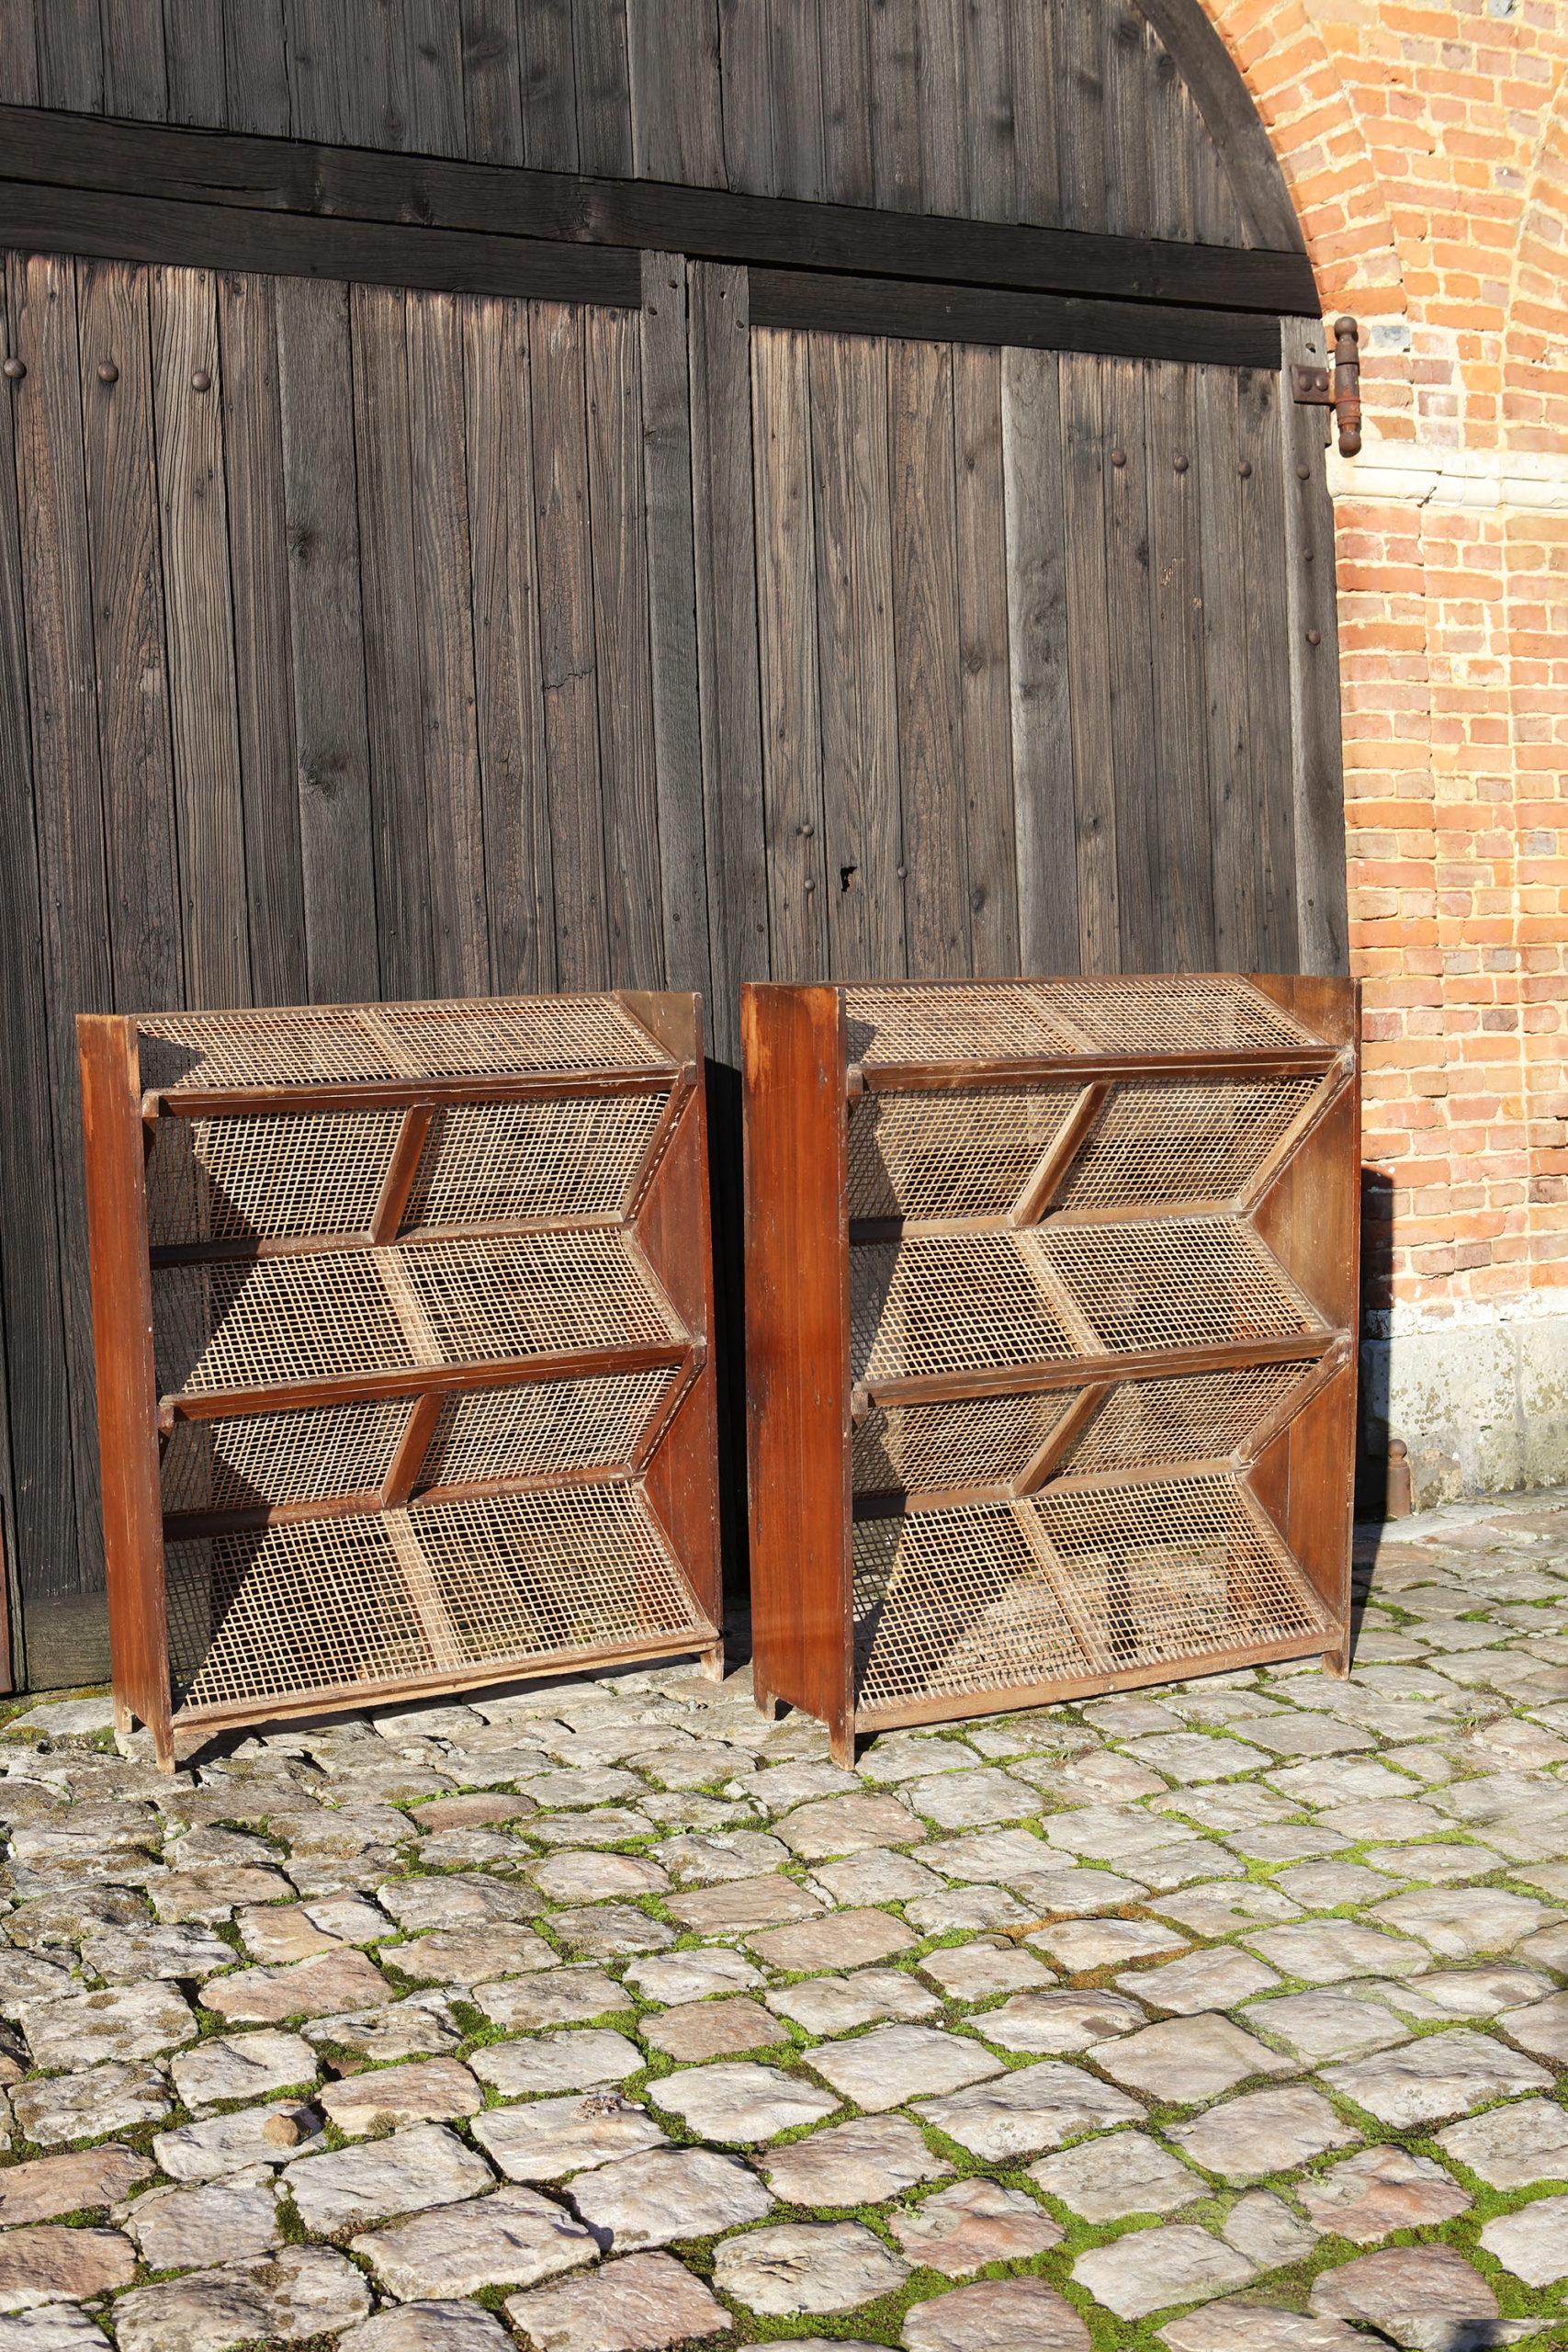 Indian Pair of Teak and Cane Magazine Racks by Pierre Jeanneret for Chandigarh, India